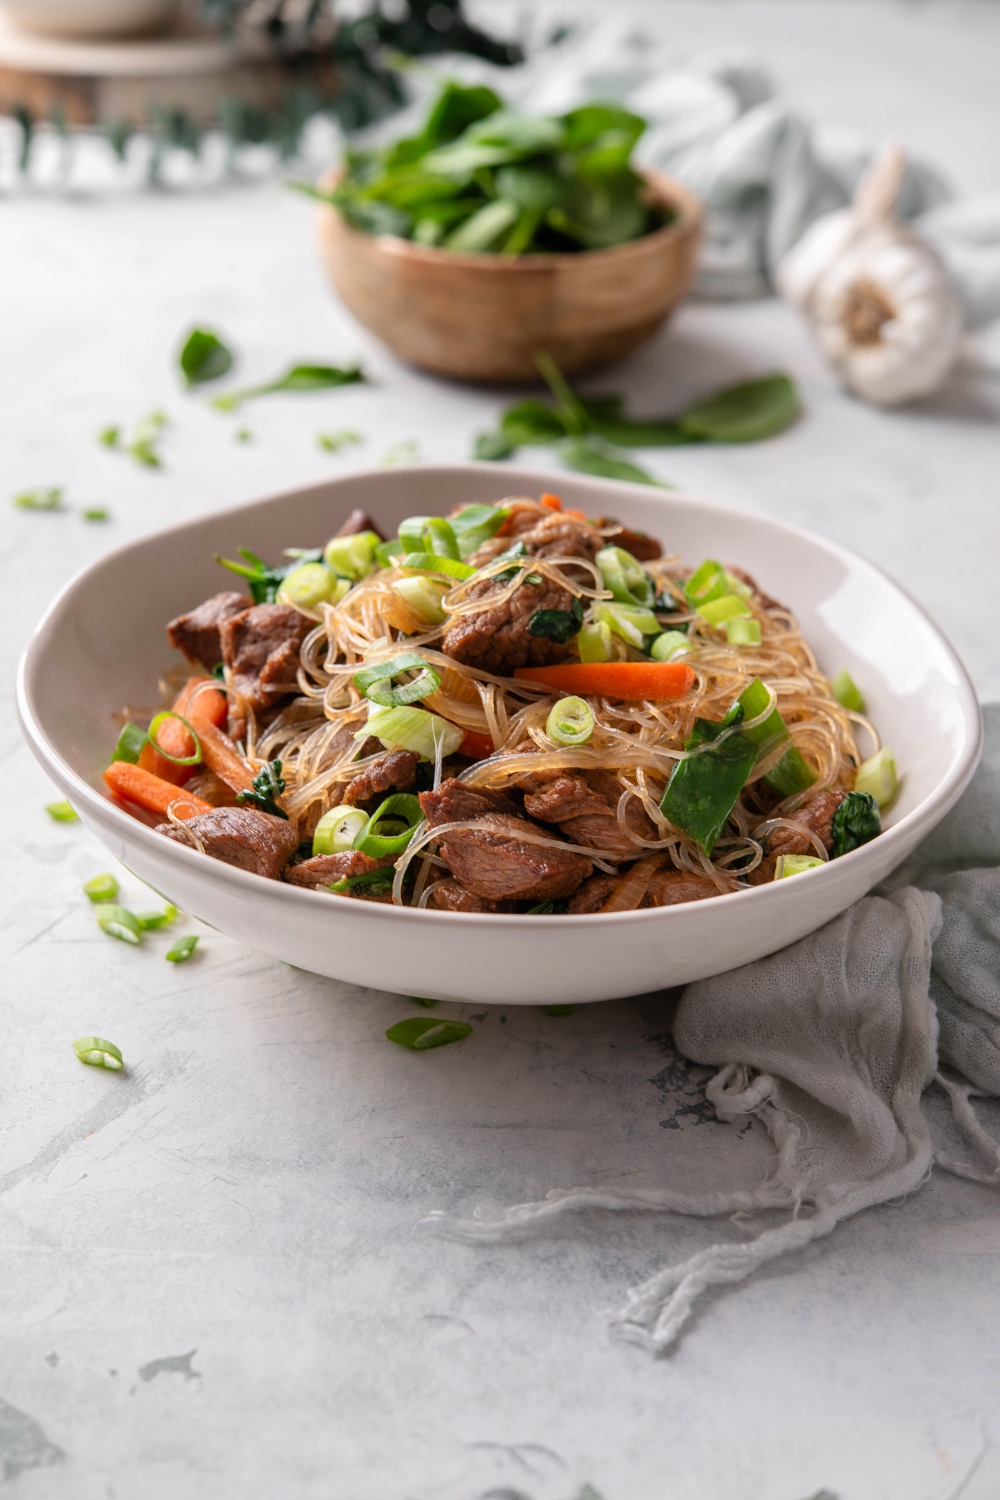 A bowl with glass noodles, beef cubes, green onions, and veggies.